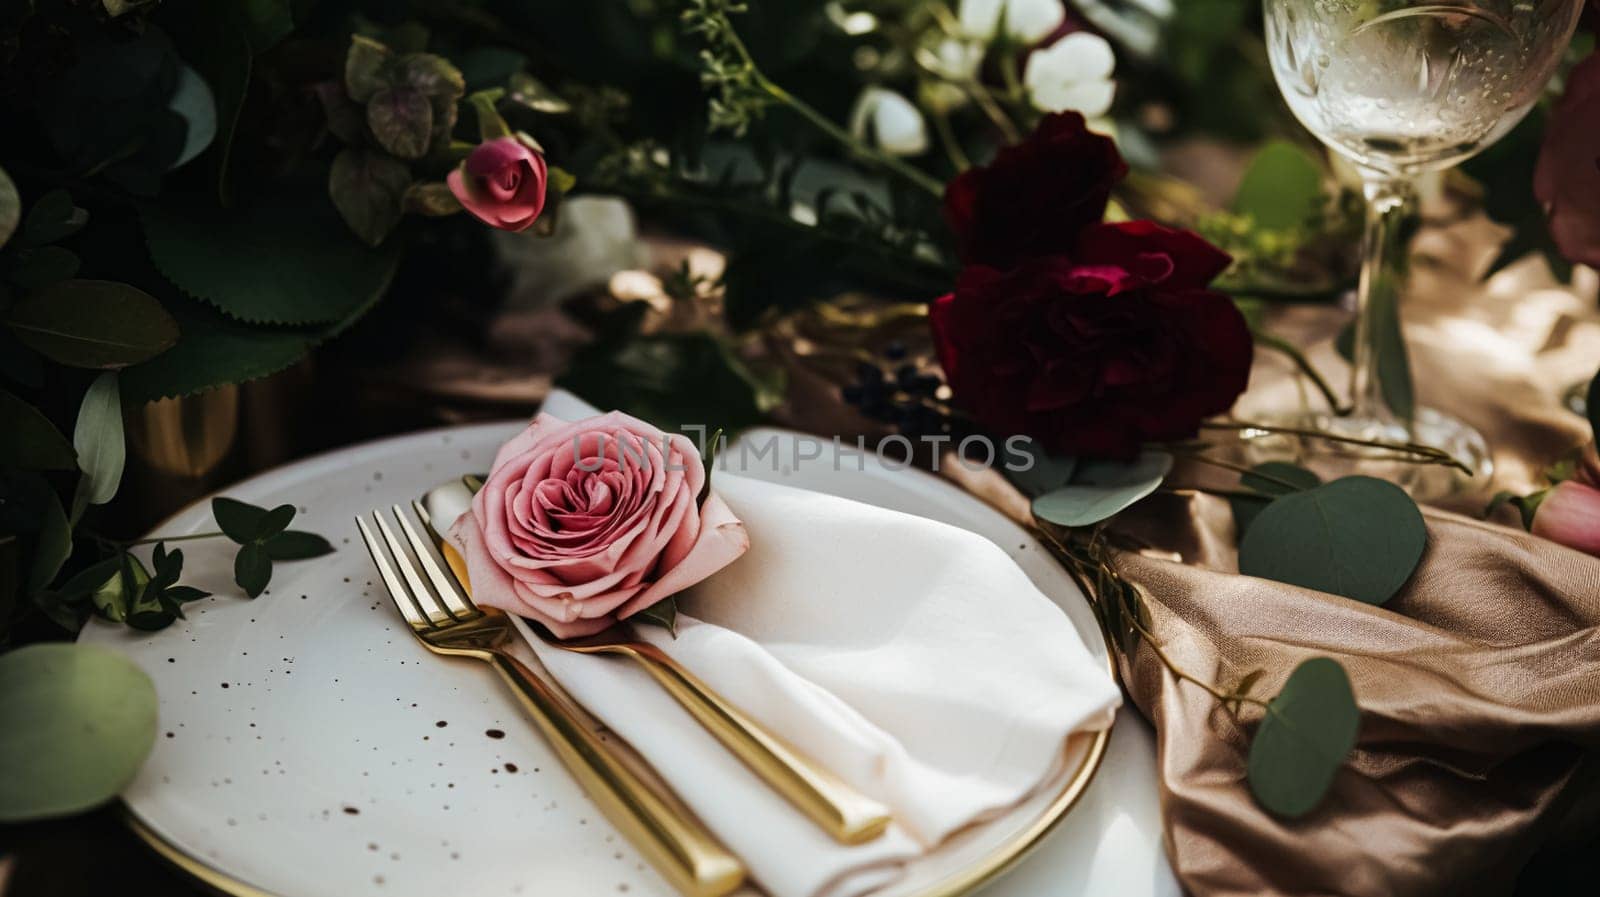 Wedding and event celebration tablescape with flowers, formal dinner table setting with roses and wine, elegant floral table decor for dinner party and holiday decoration, home styling by Anneleven